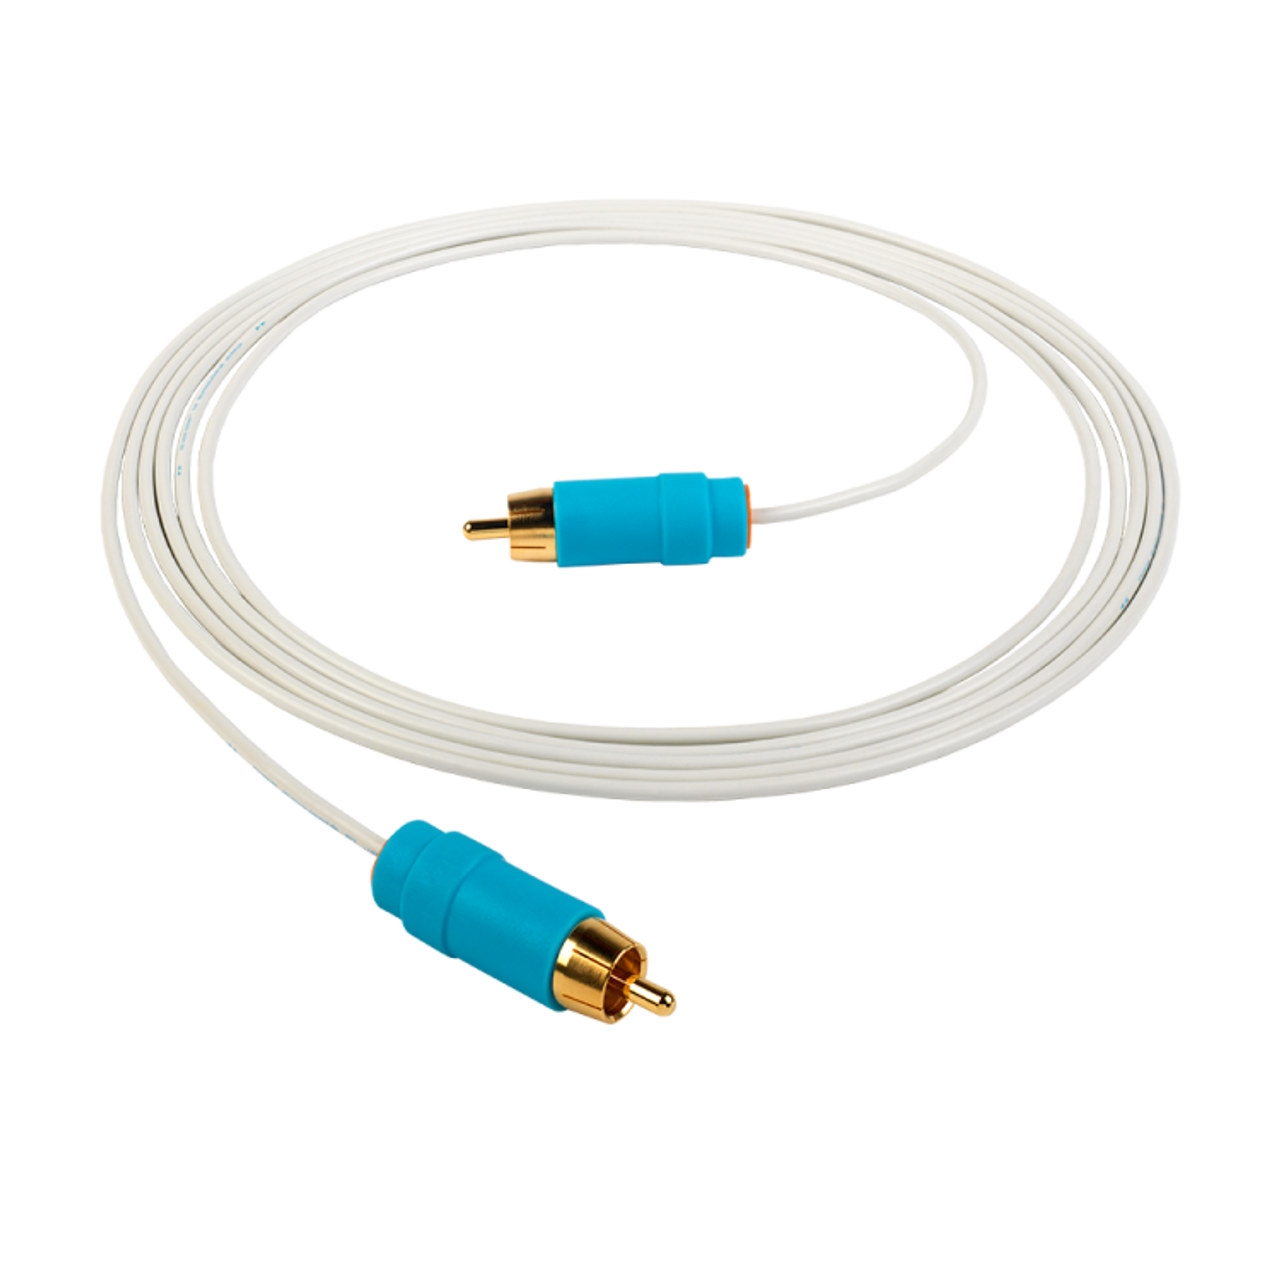 Cables C-sub Analogue subwoofer cable The Organisation